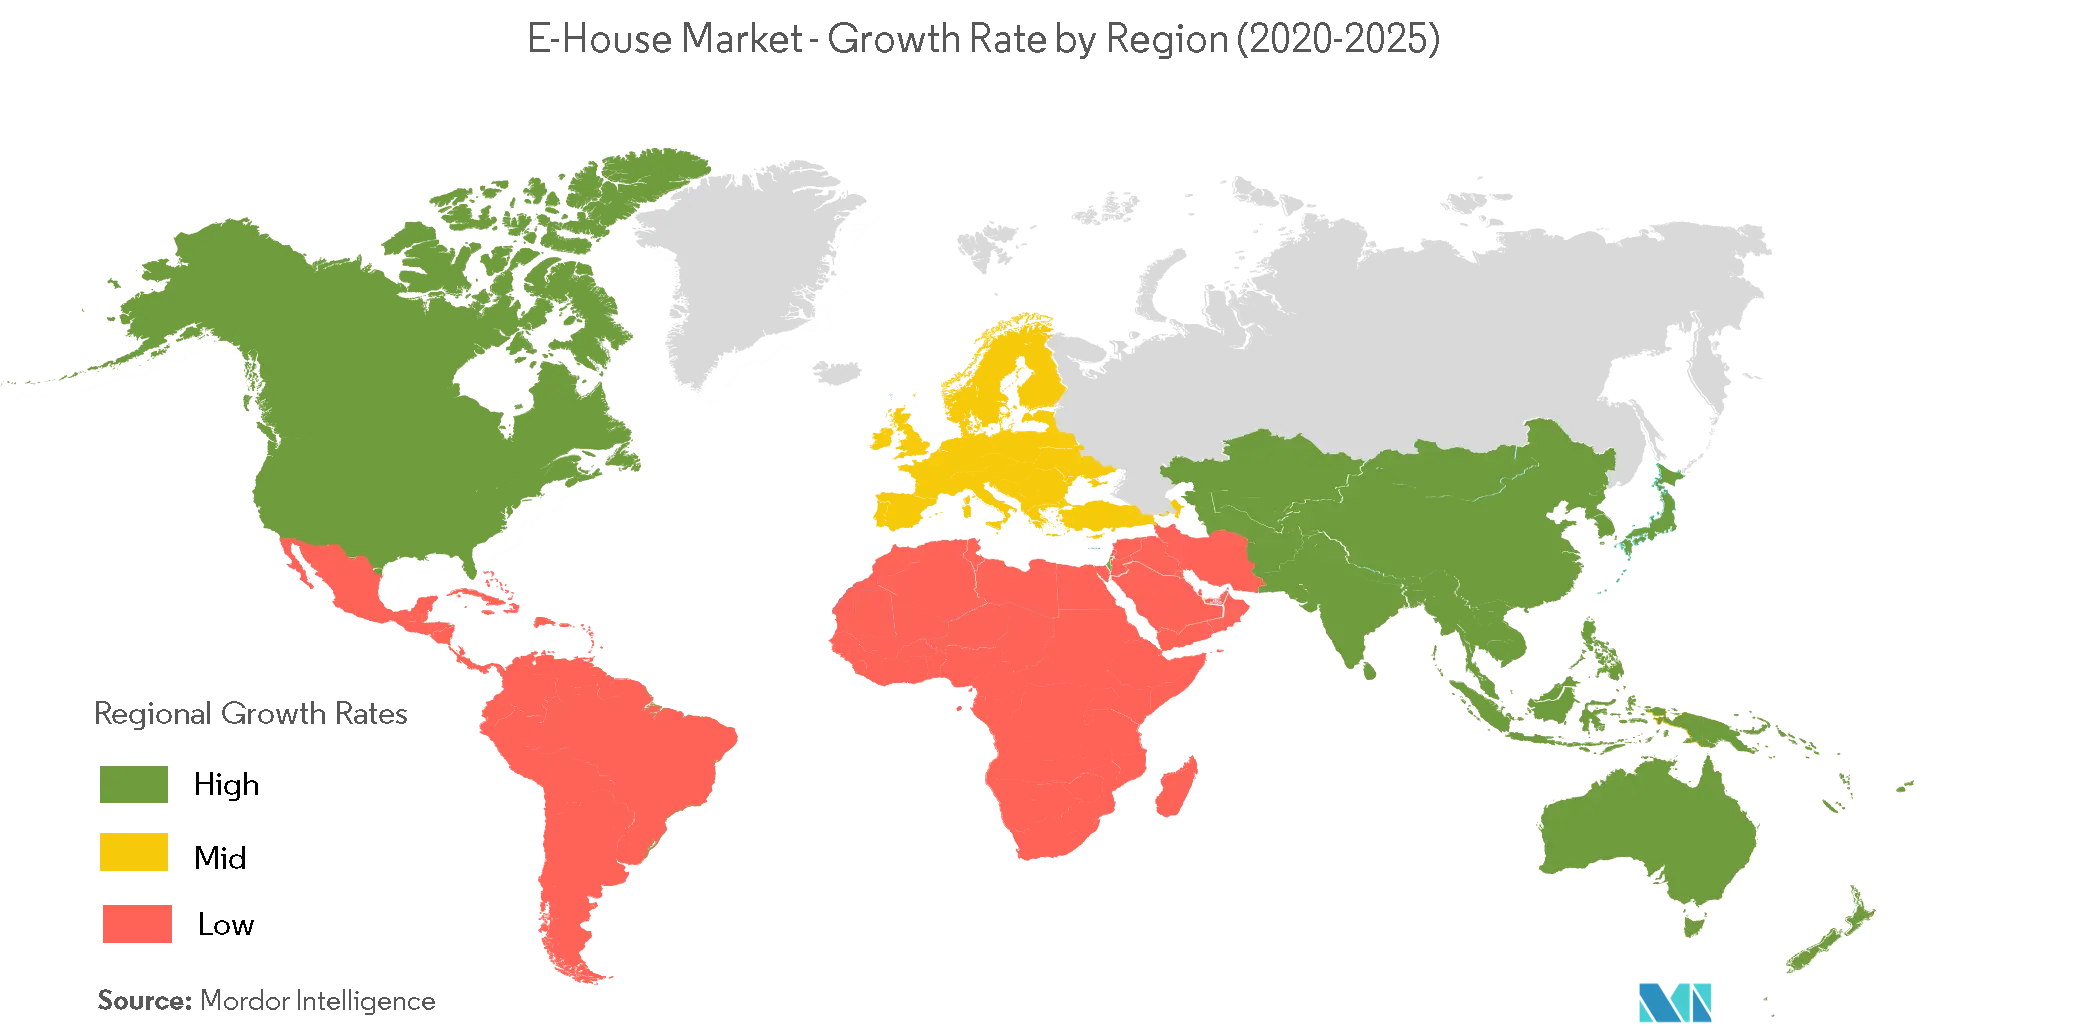 E-House Market- Growth Rate by Region (2020-2025)